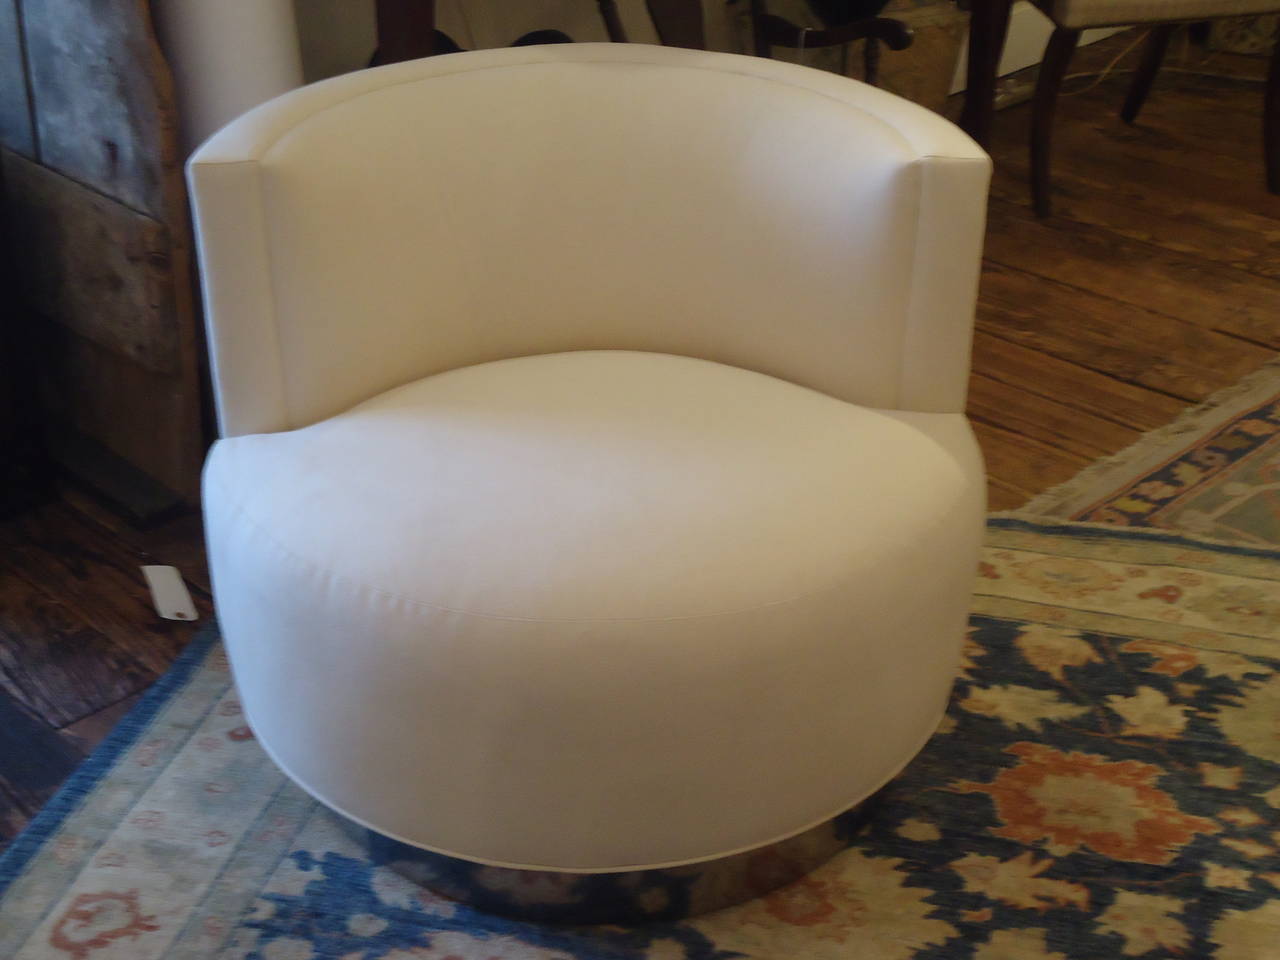 Pace style, wonderfully shaped club chair, new white duck upholstery.
Sits on a chrome base and swivels all the way around.